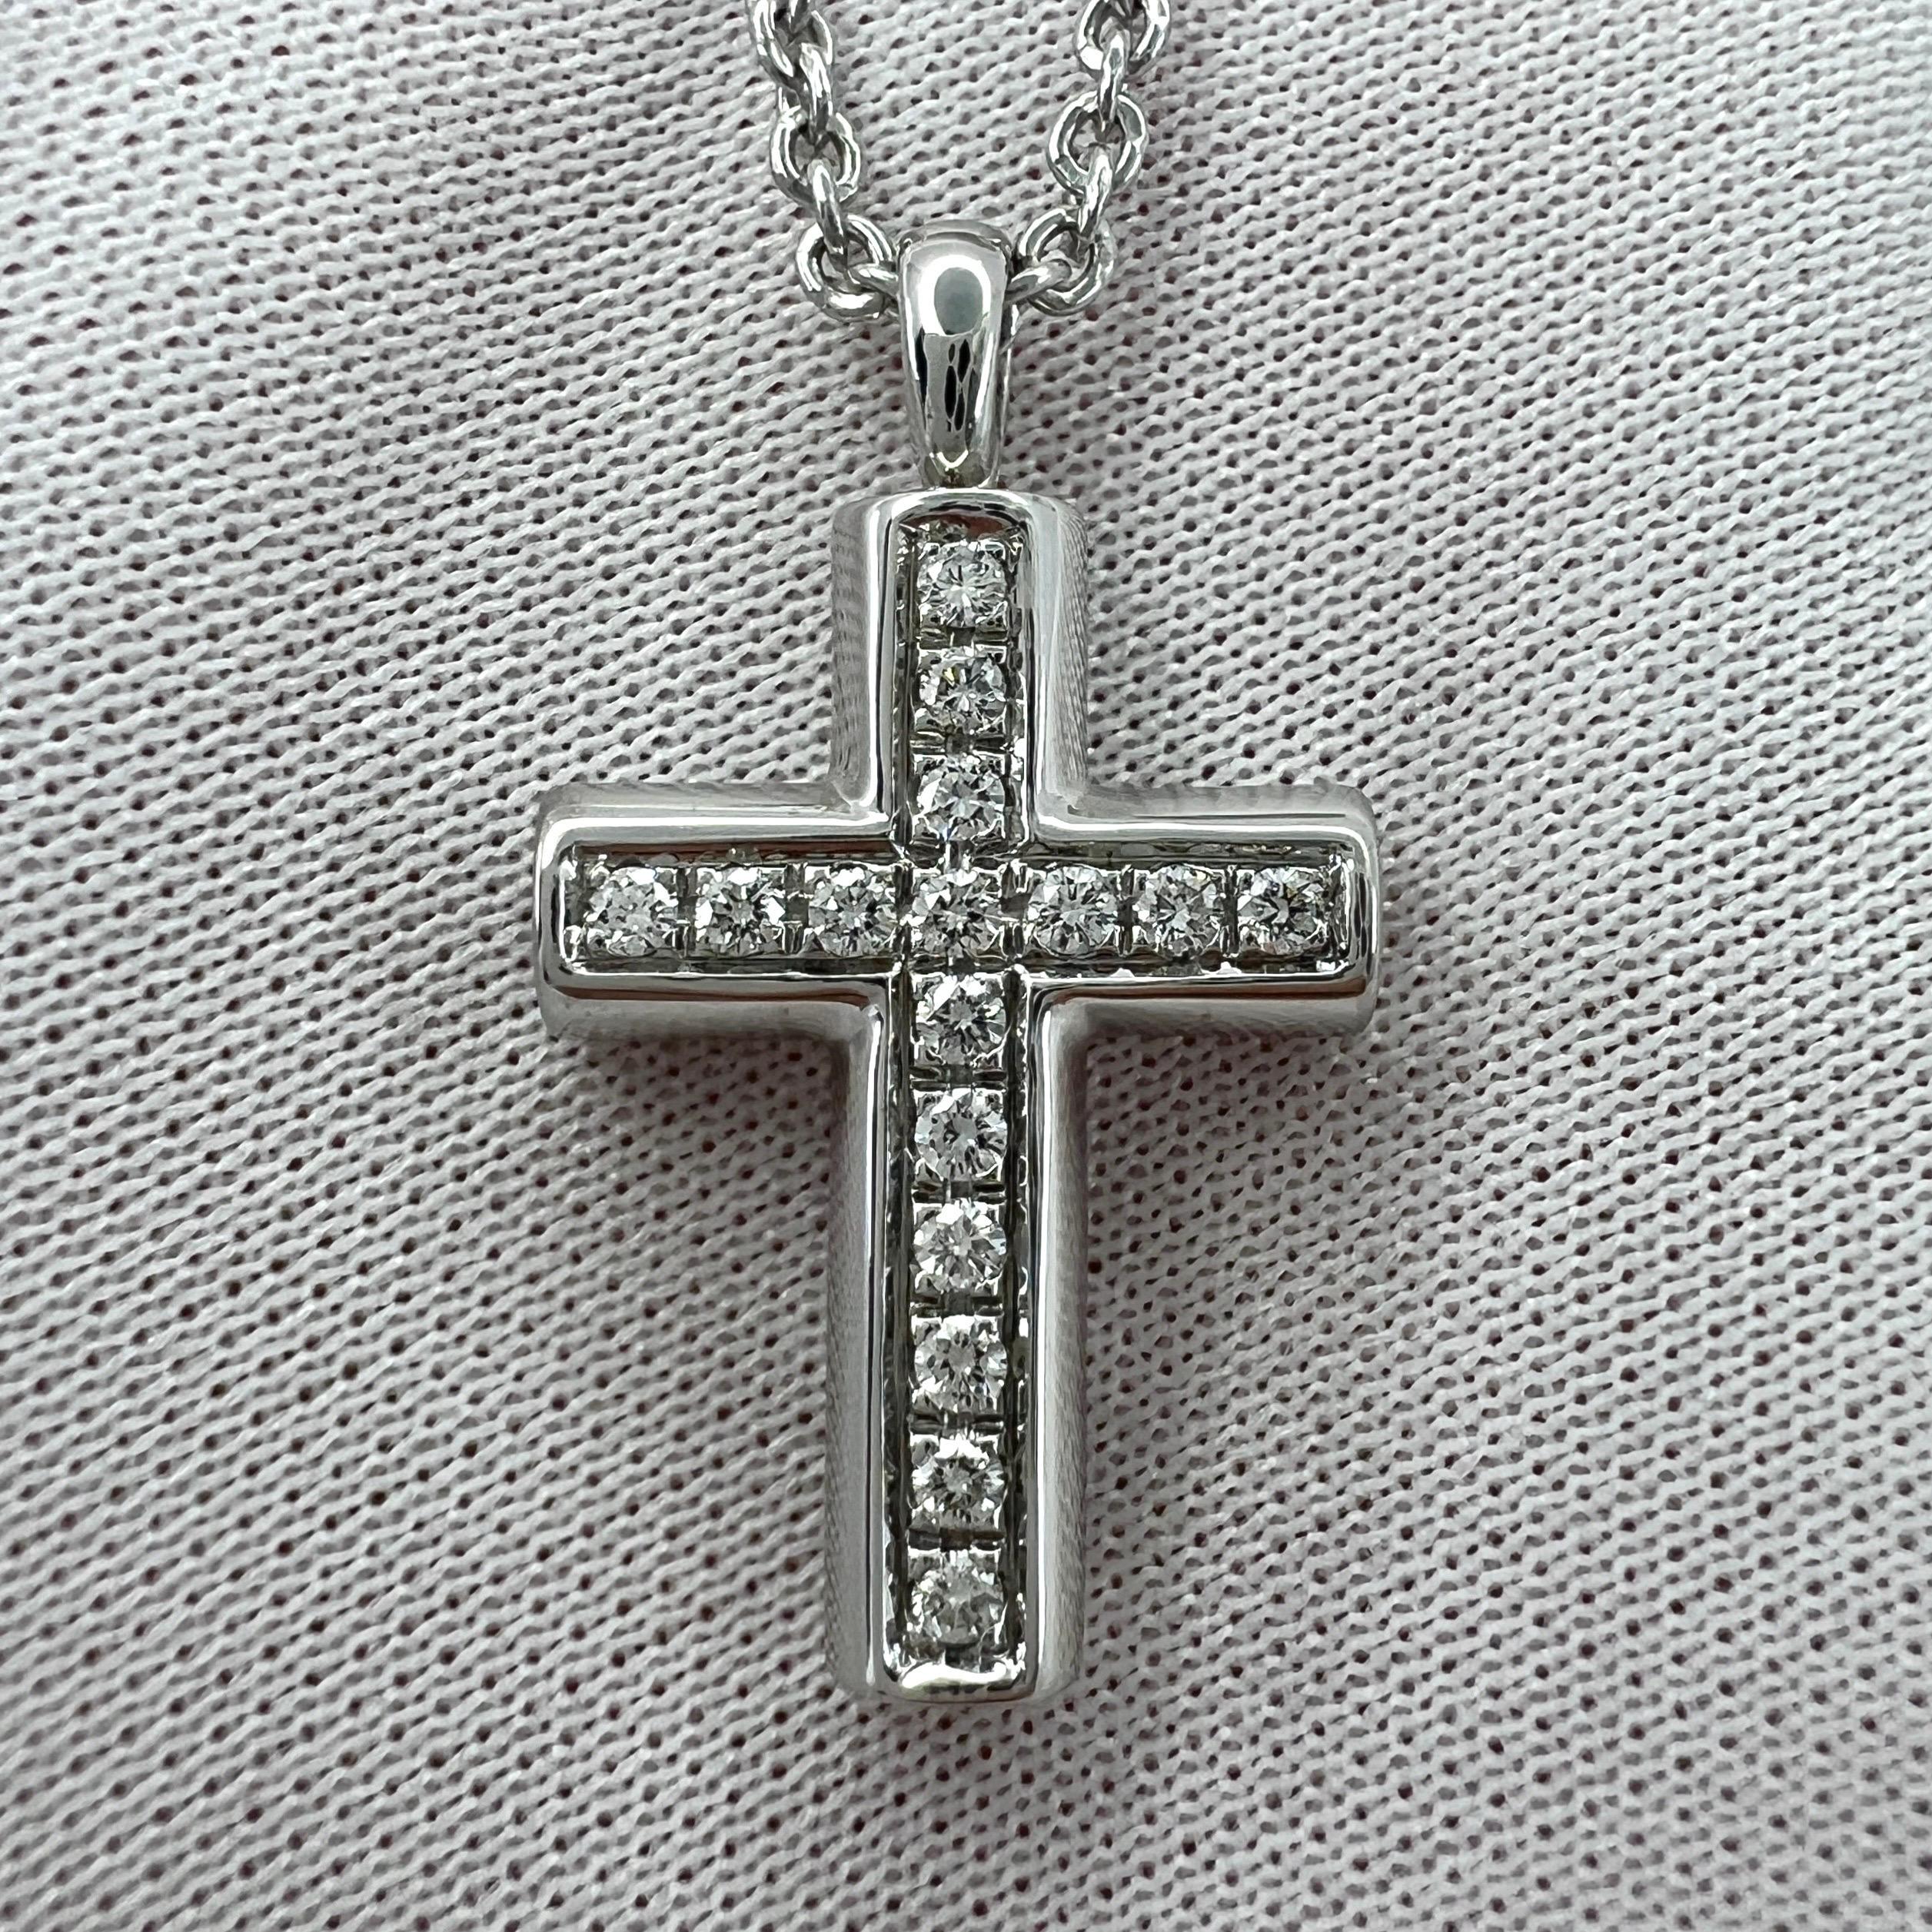 A Rare Vintage Bvlgari 18k White Gold Diamond Cross Pendant Necklace.

A beautiful Bvlgari diamond cross, set with 1.5mm round brilliant cut natural diamonds. The cross measures approx. 26x14mm. 

Fine jewellery houses like Bvlgari only use the